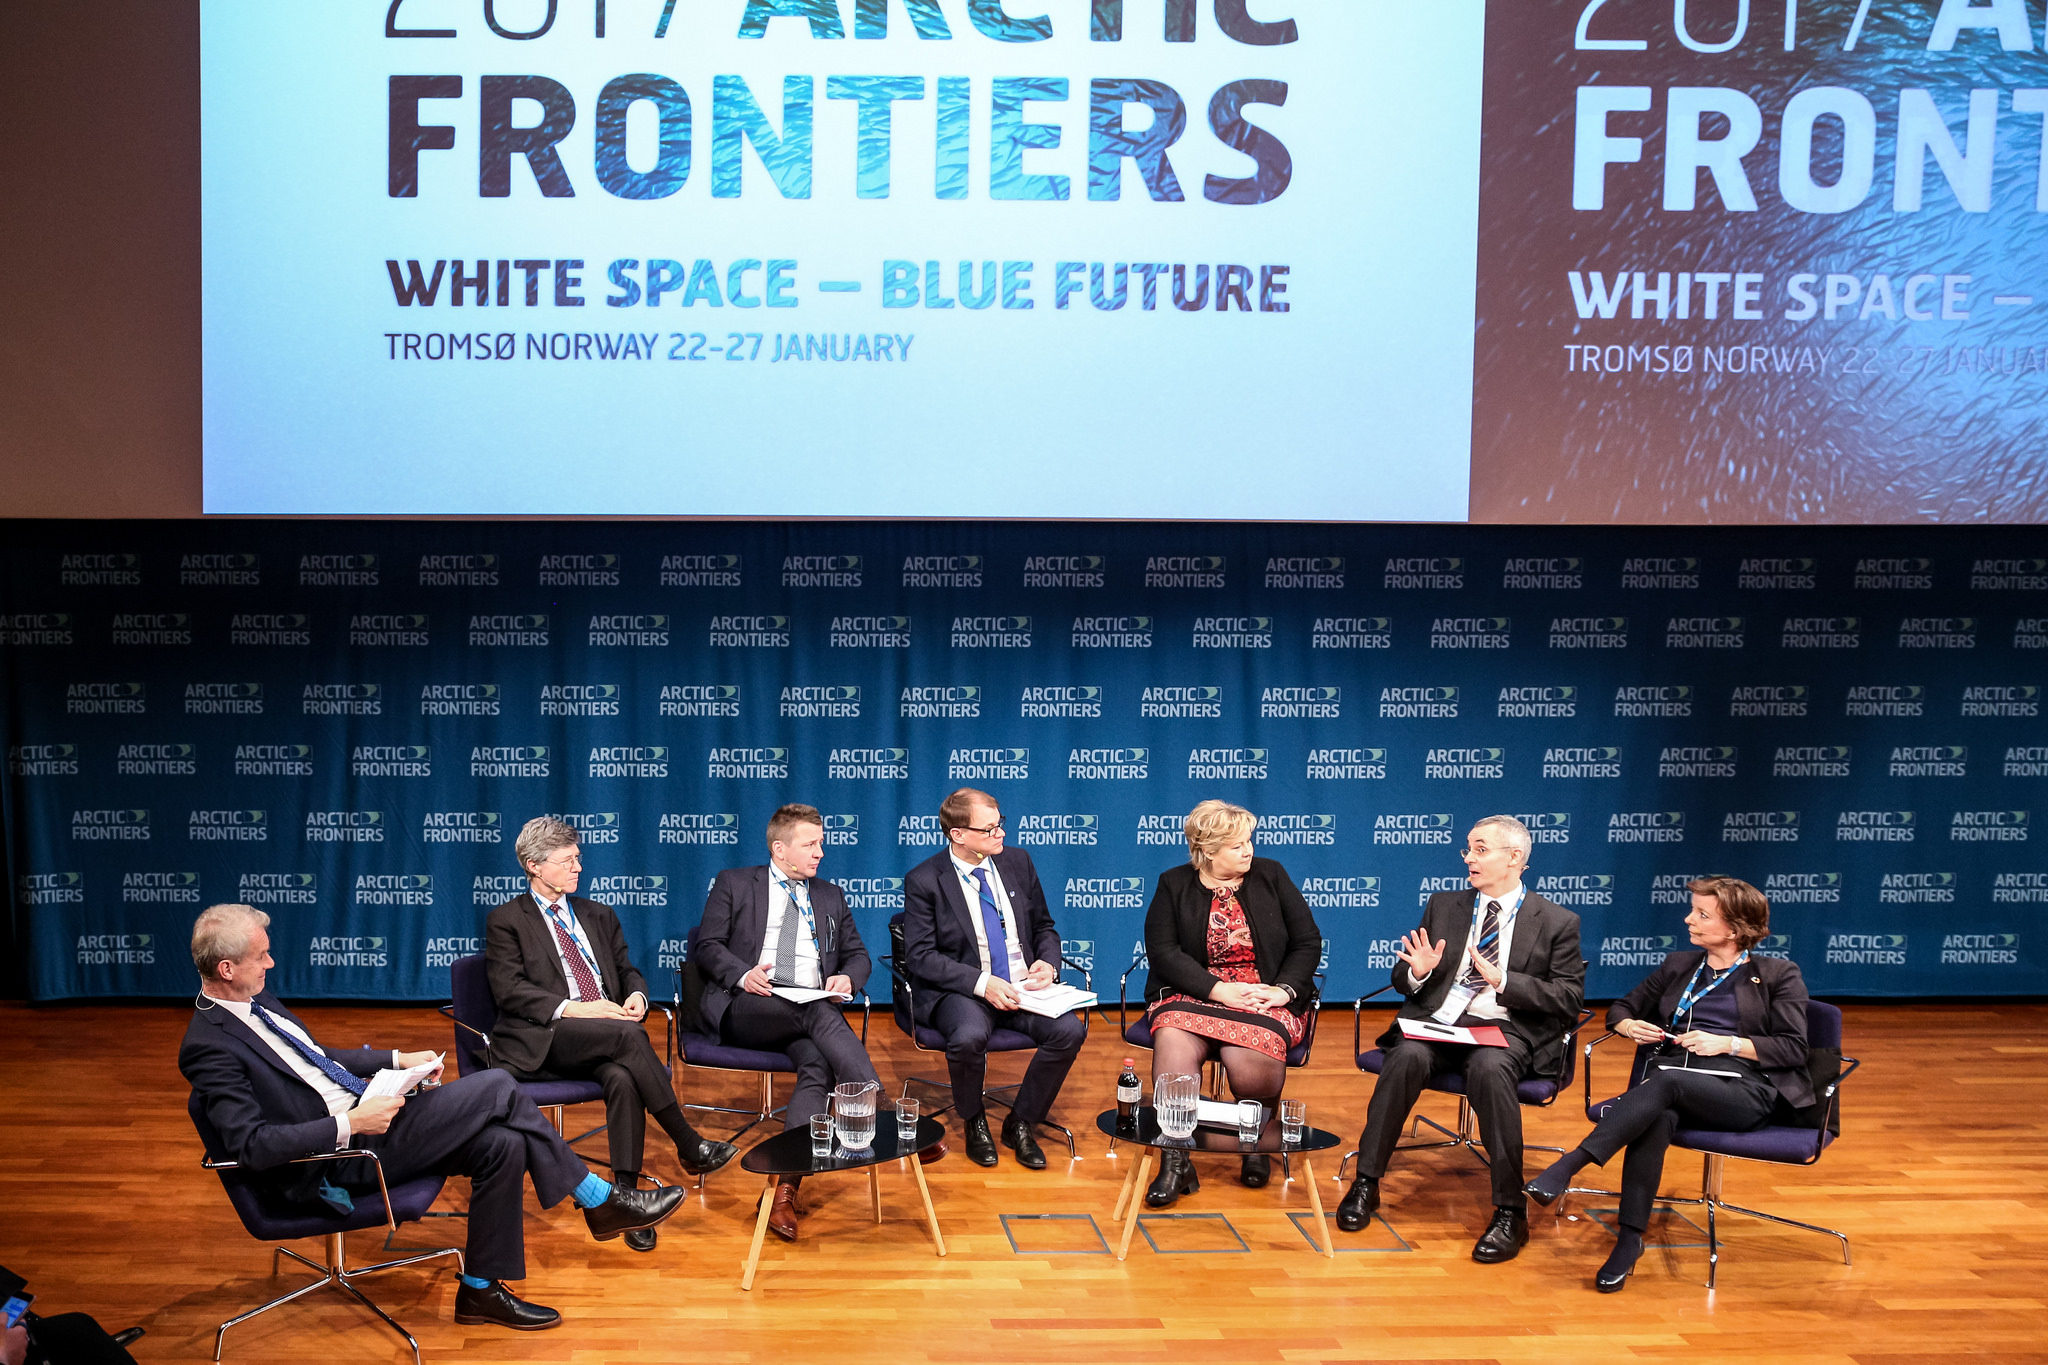 Arctic Frontiers discussion panel